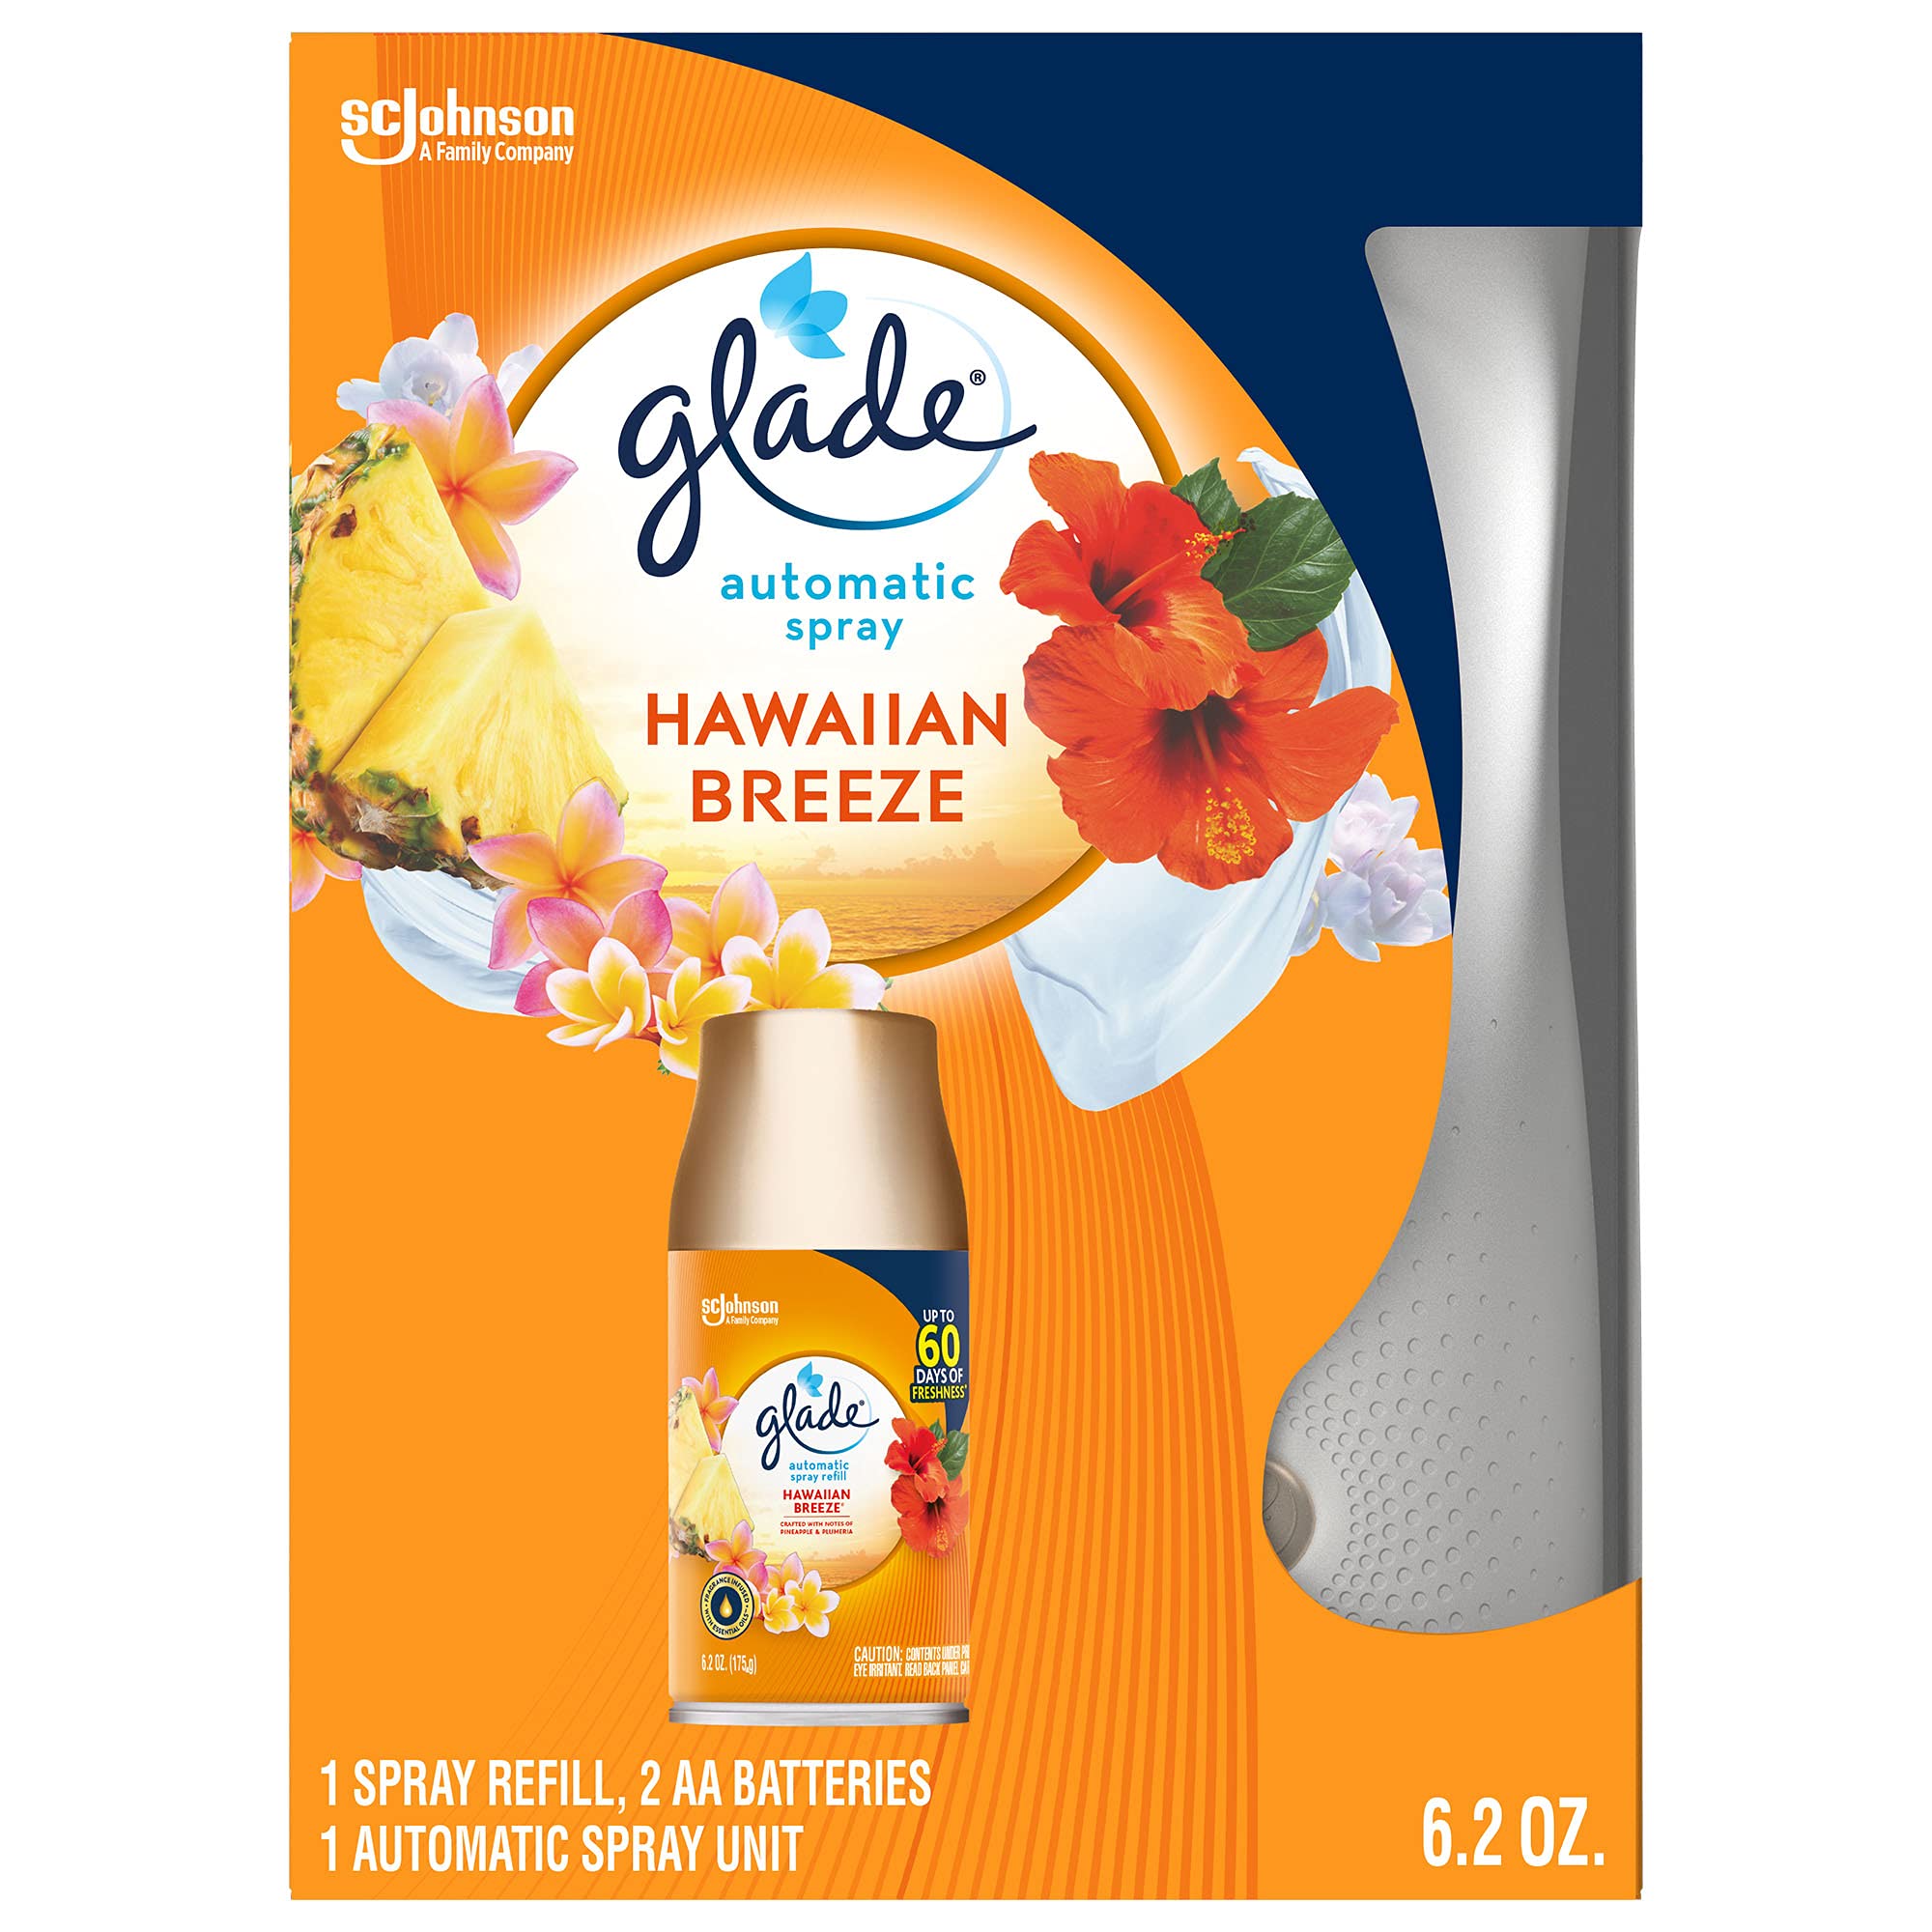 Glade Automatic Spray Refill and Holder Kit, Air Freshener for Home and  Bathroom, Hawaiian Breeze, 6.2 Oz